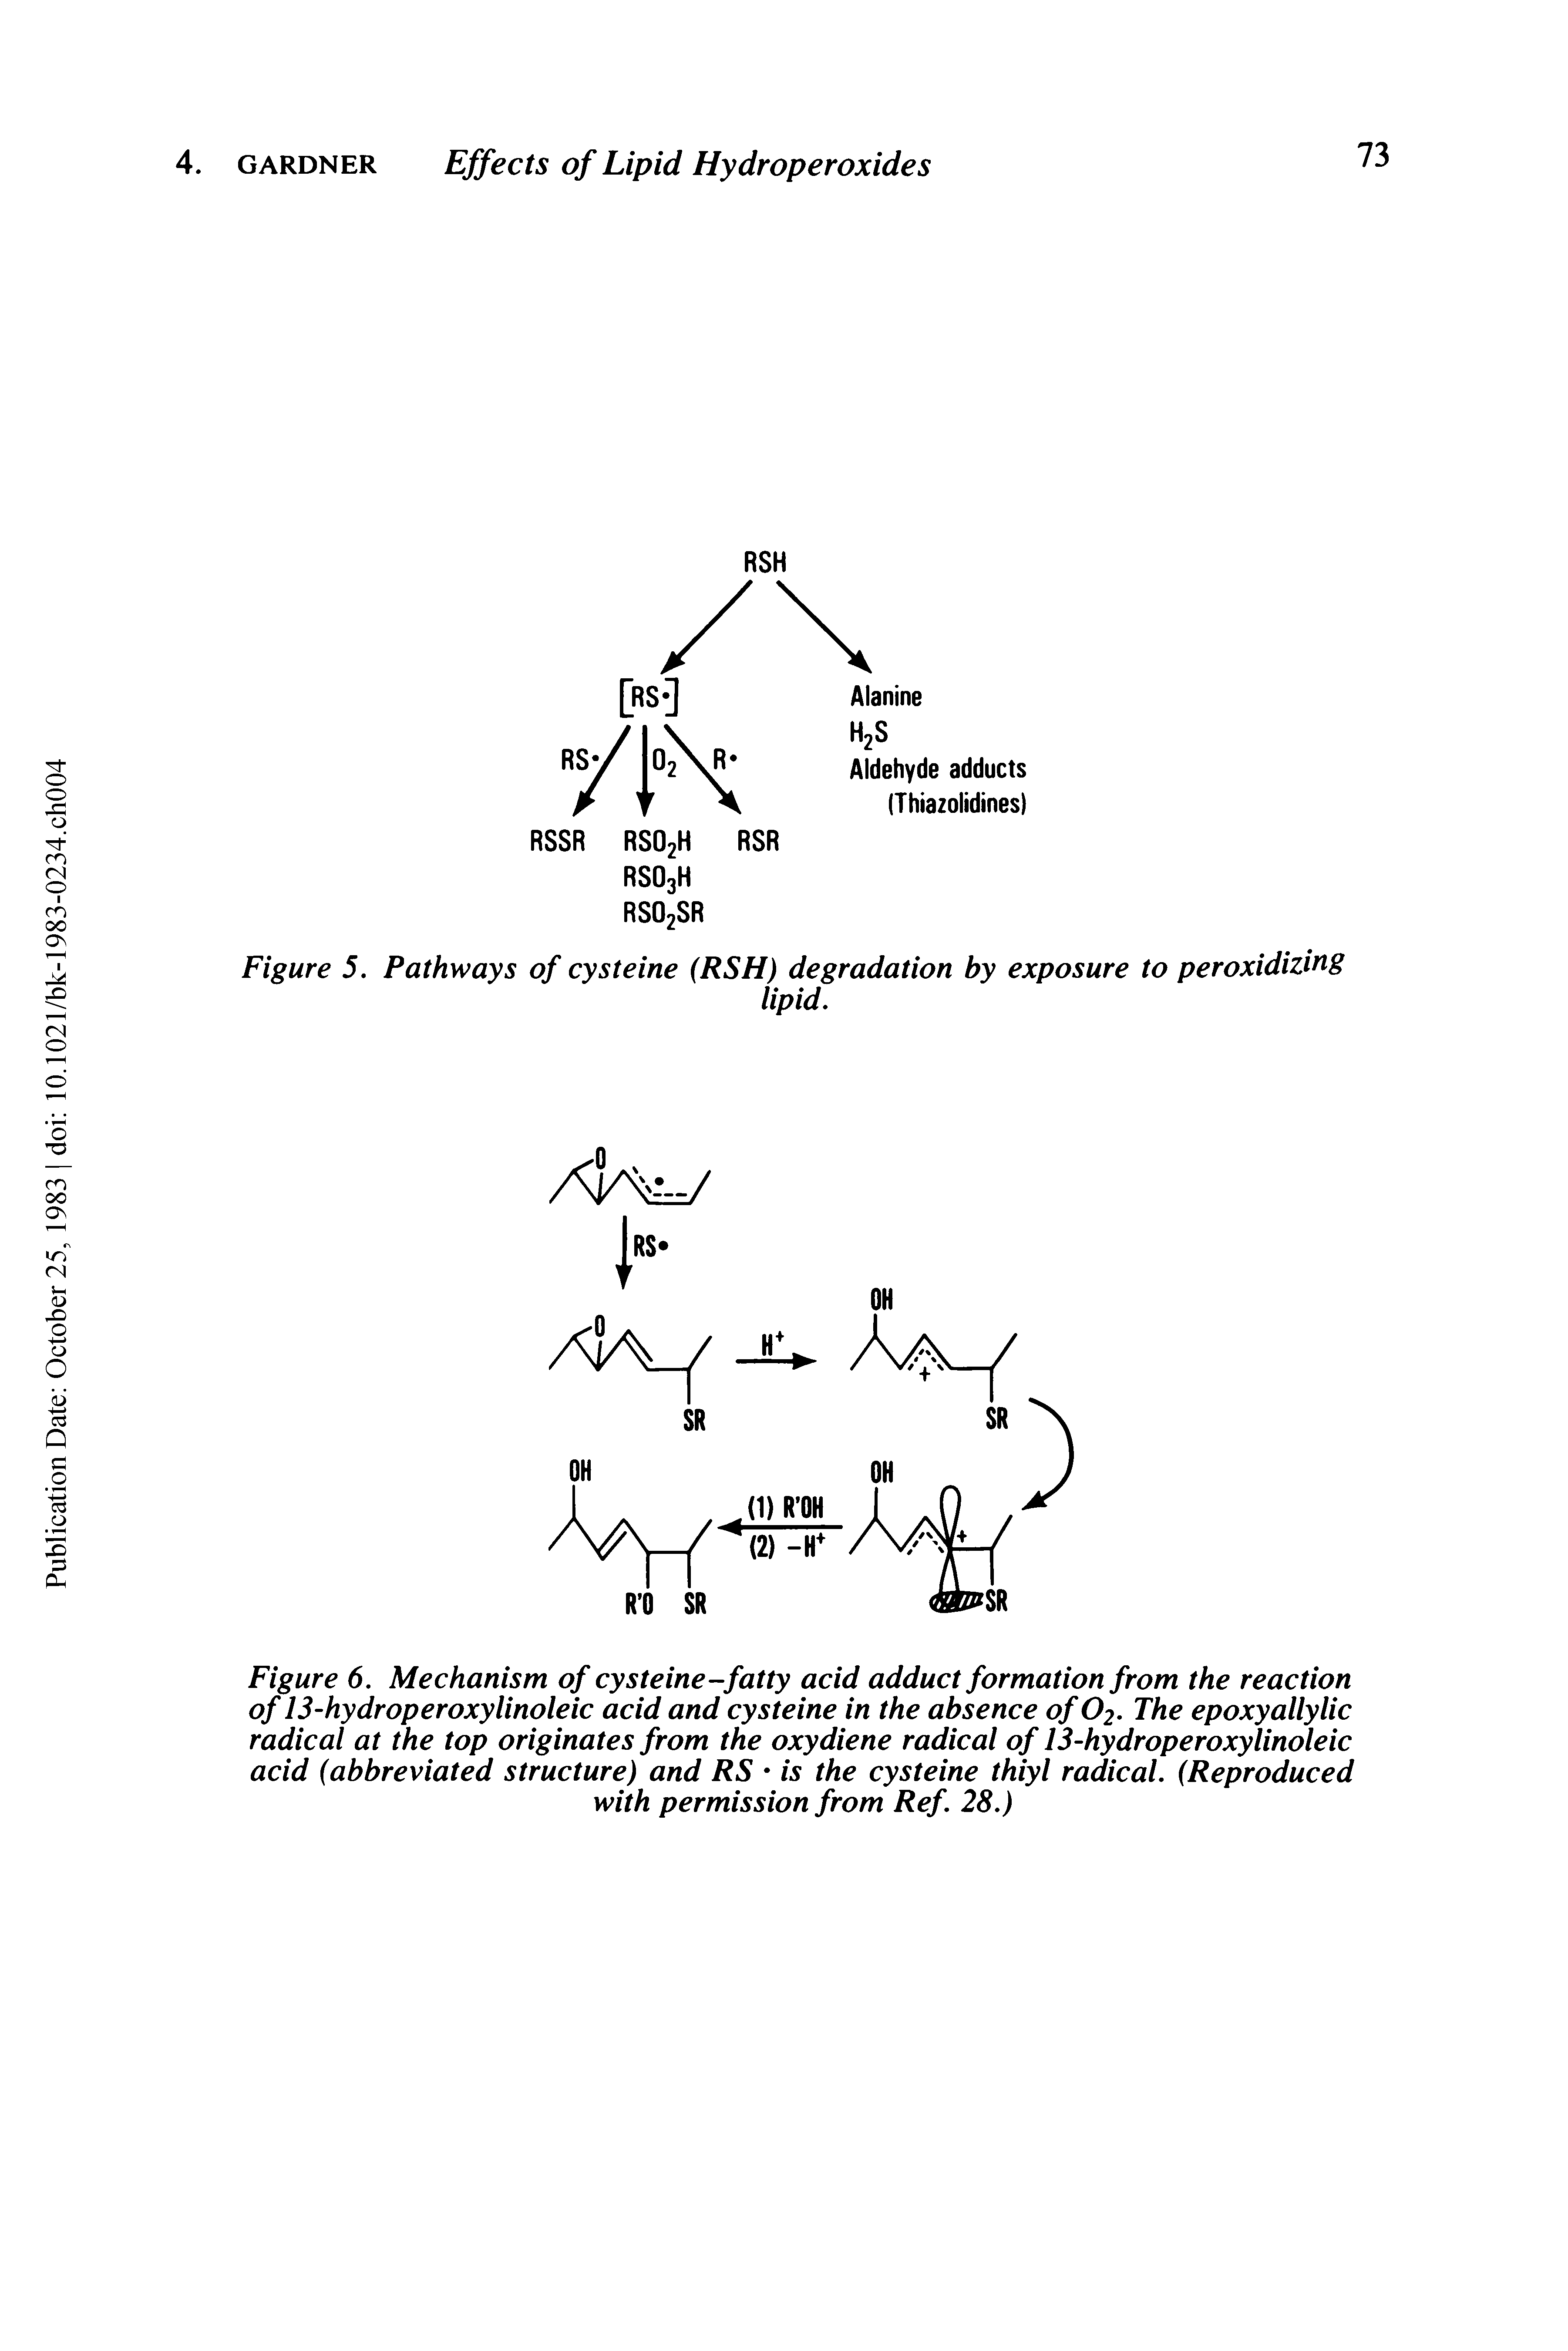 Figure 6. Mechanism of cysteine-fatty acid adduct formation from the reaction of 13-hydroperoxylinoleic acid and cysteine in the absence of O2. The epoxyallylic radical at the top originates from the oxydiene radical of 13-hydroperoxylinoleic acid abbreviated structure) and RS is the cysteine thiyl radical. Reproduced with permission from Ref. 28.)...